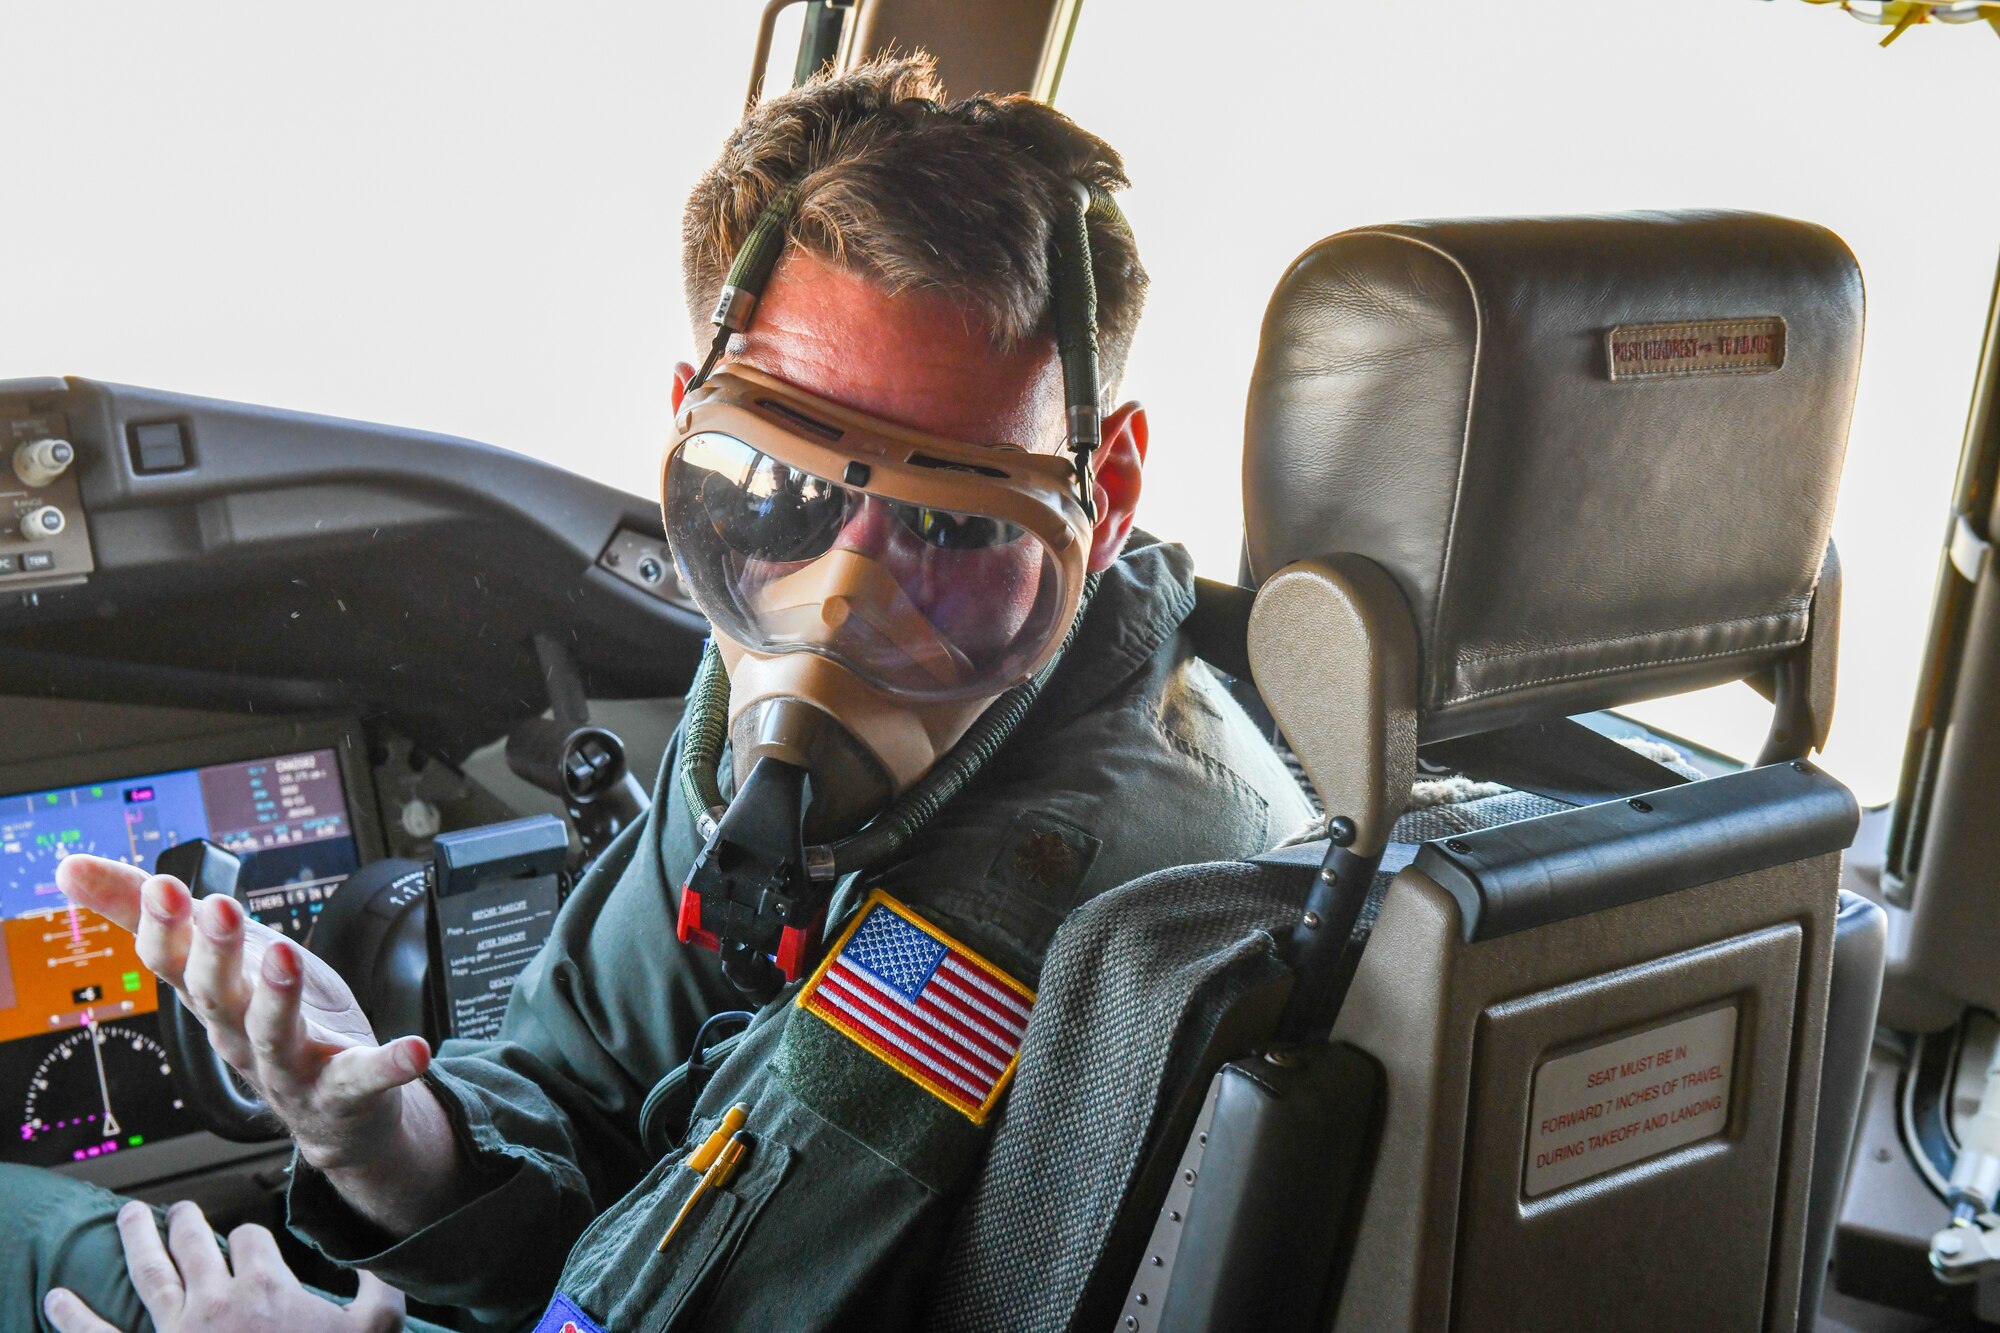 U.S. Air Force Maj. Matthew Schaefer, 56th Air Refueling Squadron instructor pilot, demonstrates proper wear of an oxygen mask at Altus Air Force Base, Oklahoma, July 11, 2022. Oxygen masks prevent hypoxia if the cabin pressure drops. (U.S. Air Force photo by Airman 1st Class Miyah Gray)